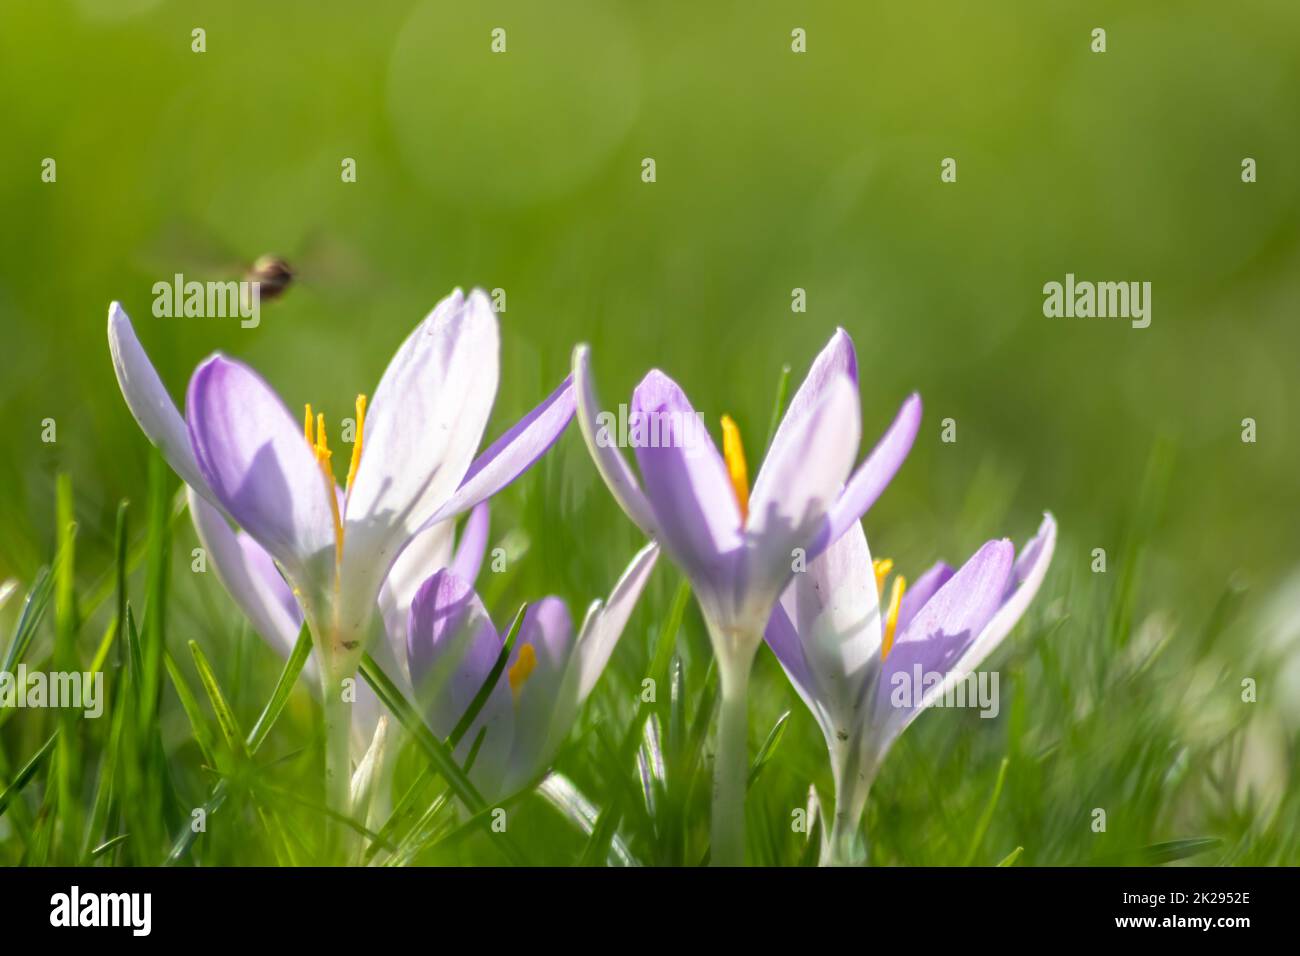 Filigree pink crocus flower blossoms in green grass are pollinated by flying insects like honey bees or flies in spring time as close-up macro with blurred background in garden landscape blooming wild Stock Photo